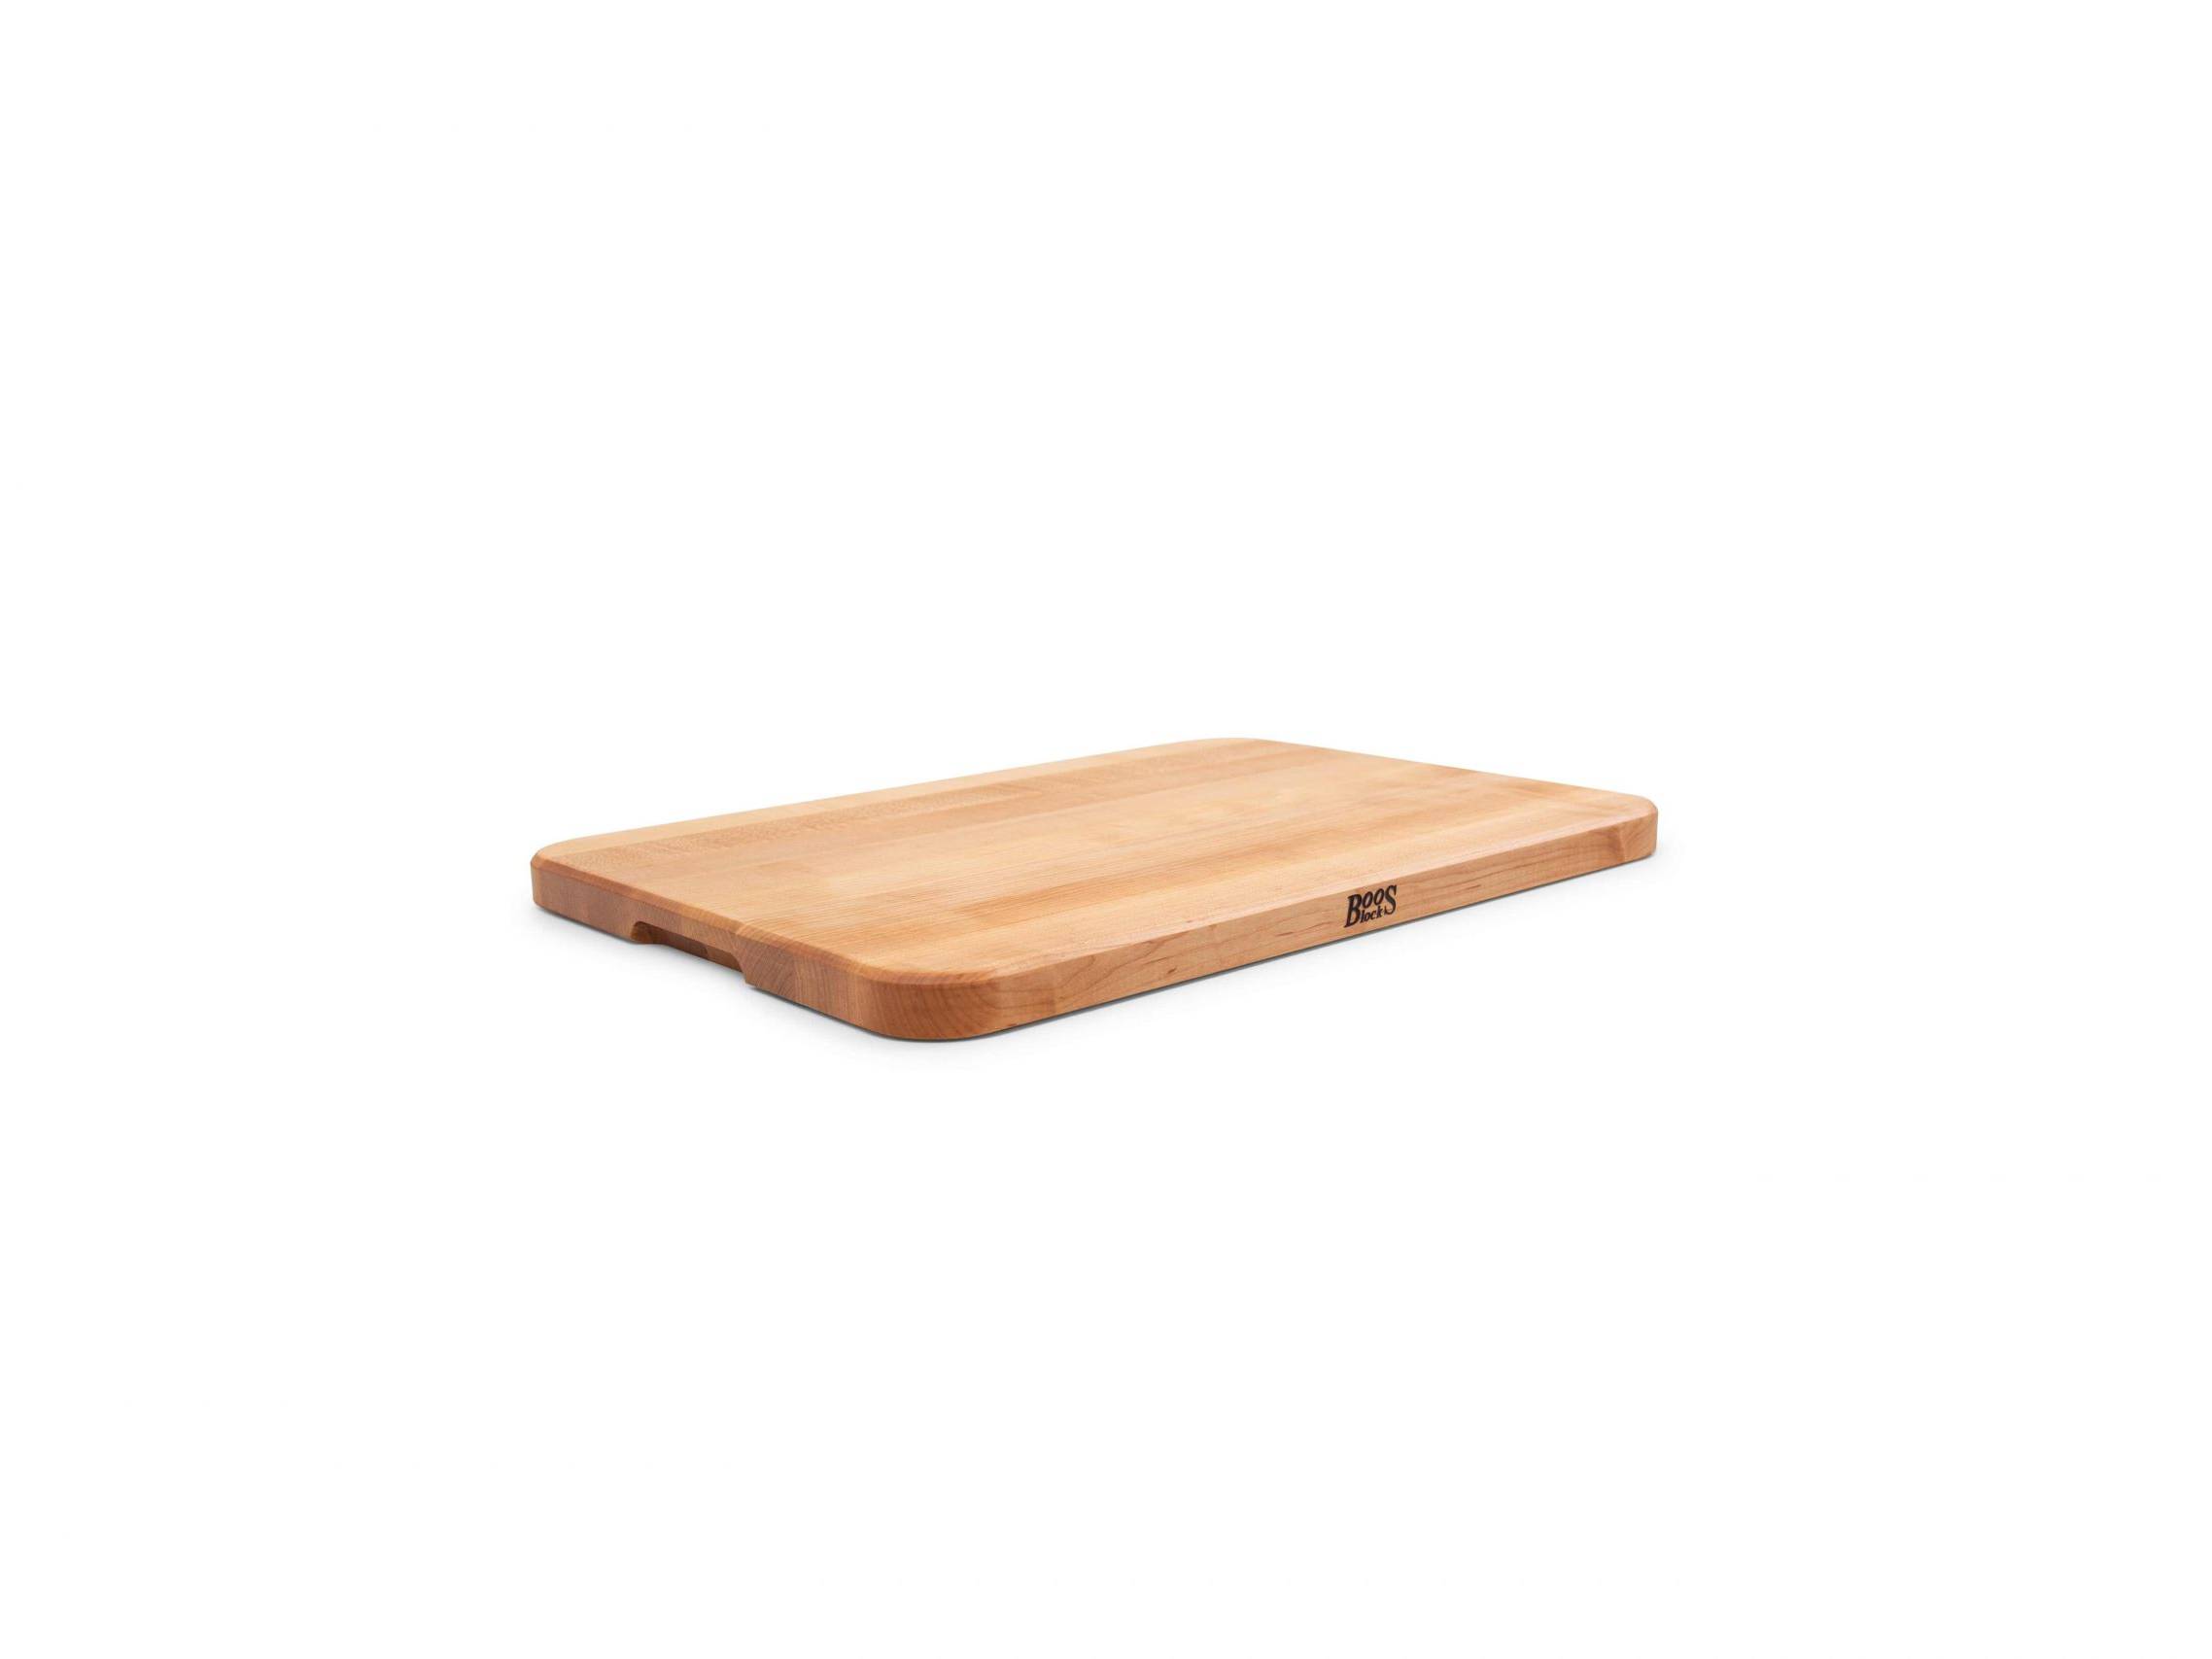 Chop-N-Serve Hard Maple Cutting Board with recessed grip; can be used on both sides 17